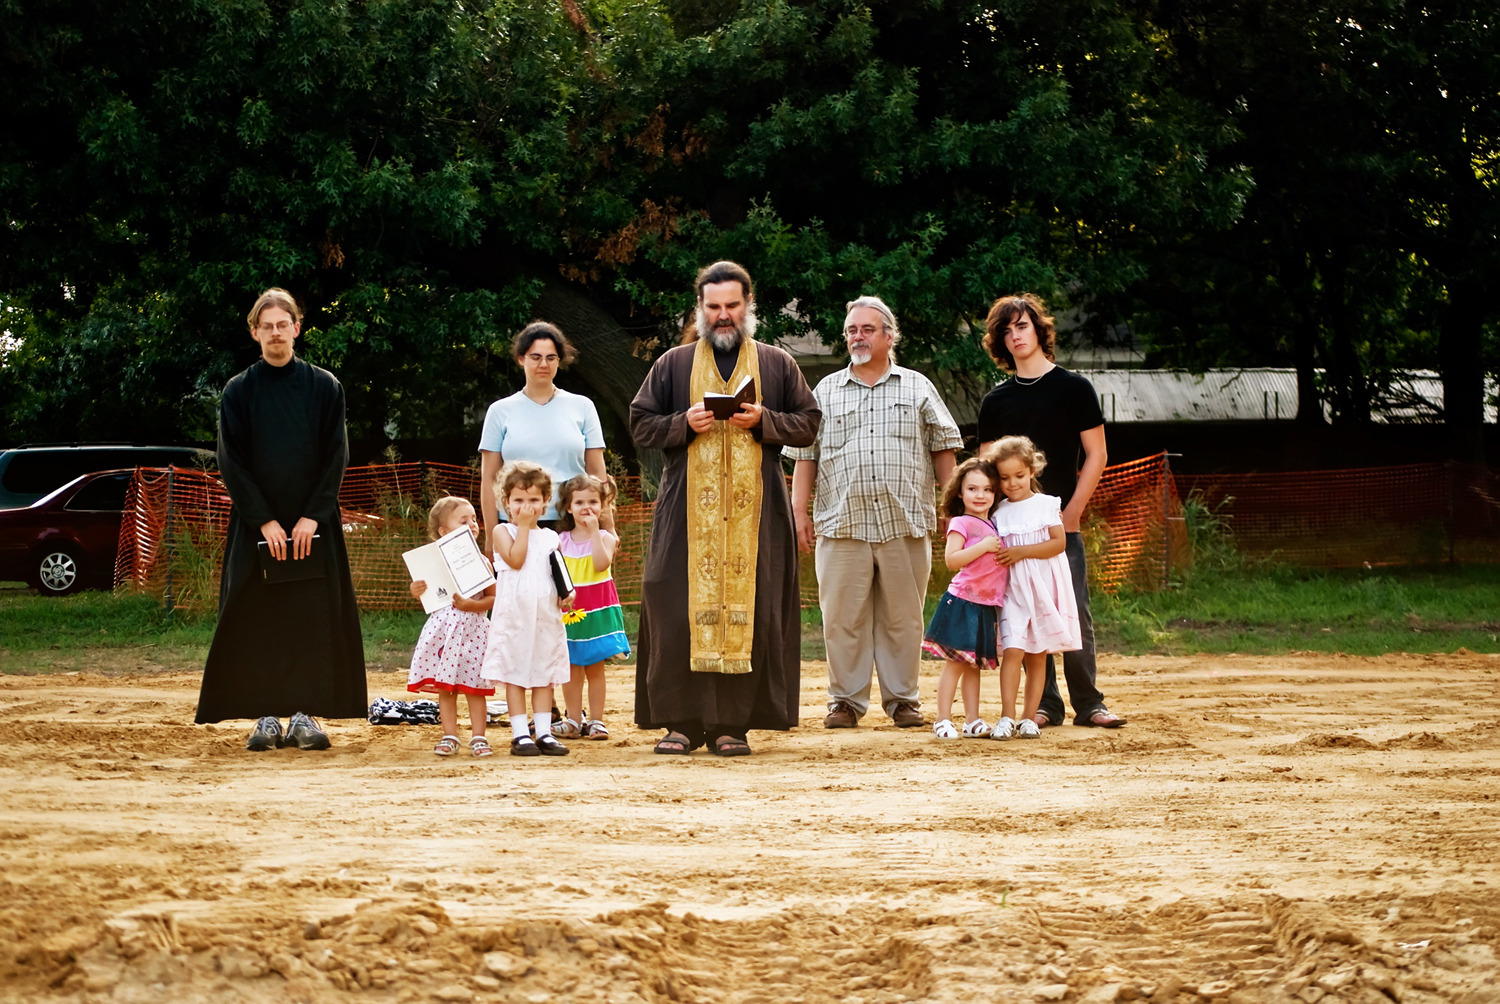 A Thursday molben on the ground that would become our temple - August 9, 2009 http://www.orthodox.net/photos/parish/2009-08-09_moleben-on-the-land+during-moleben.jpg